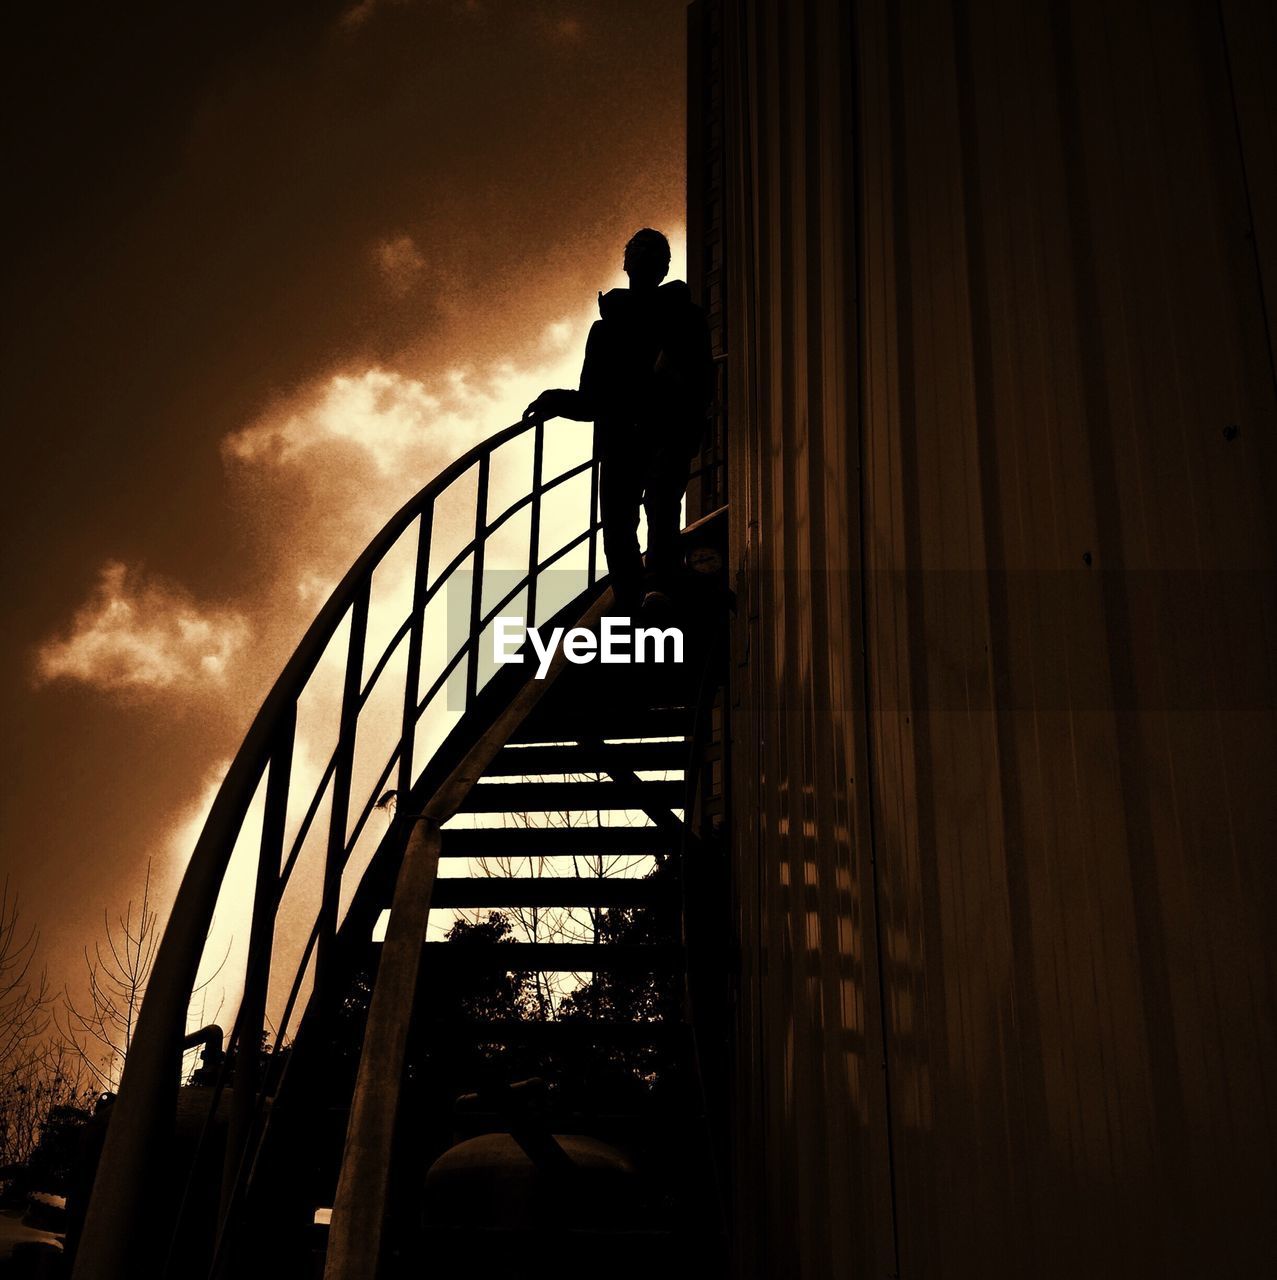 Low angle view of silhouette person on staircase against sky